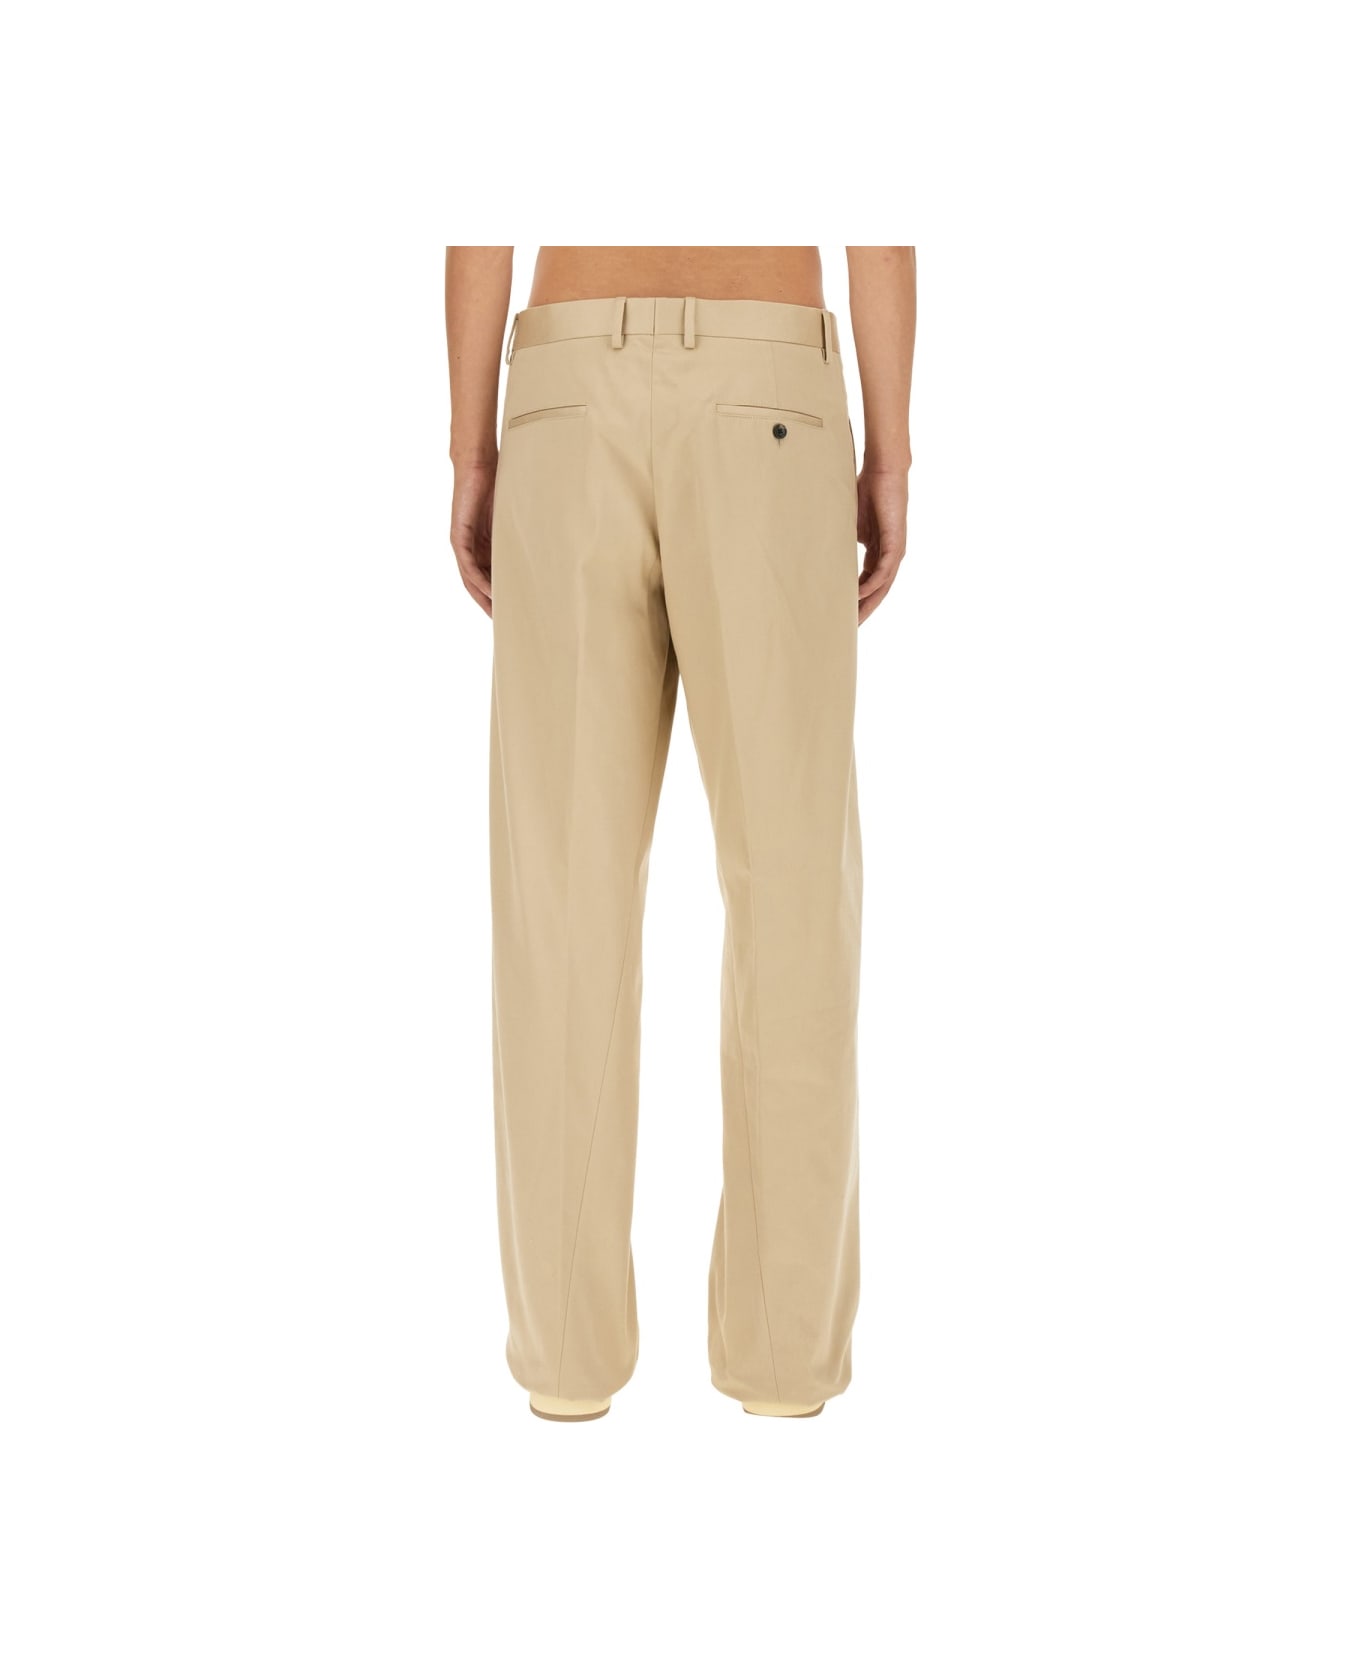 Lanvin Twisted Chino Pants - BEIGE